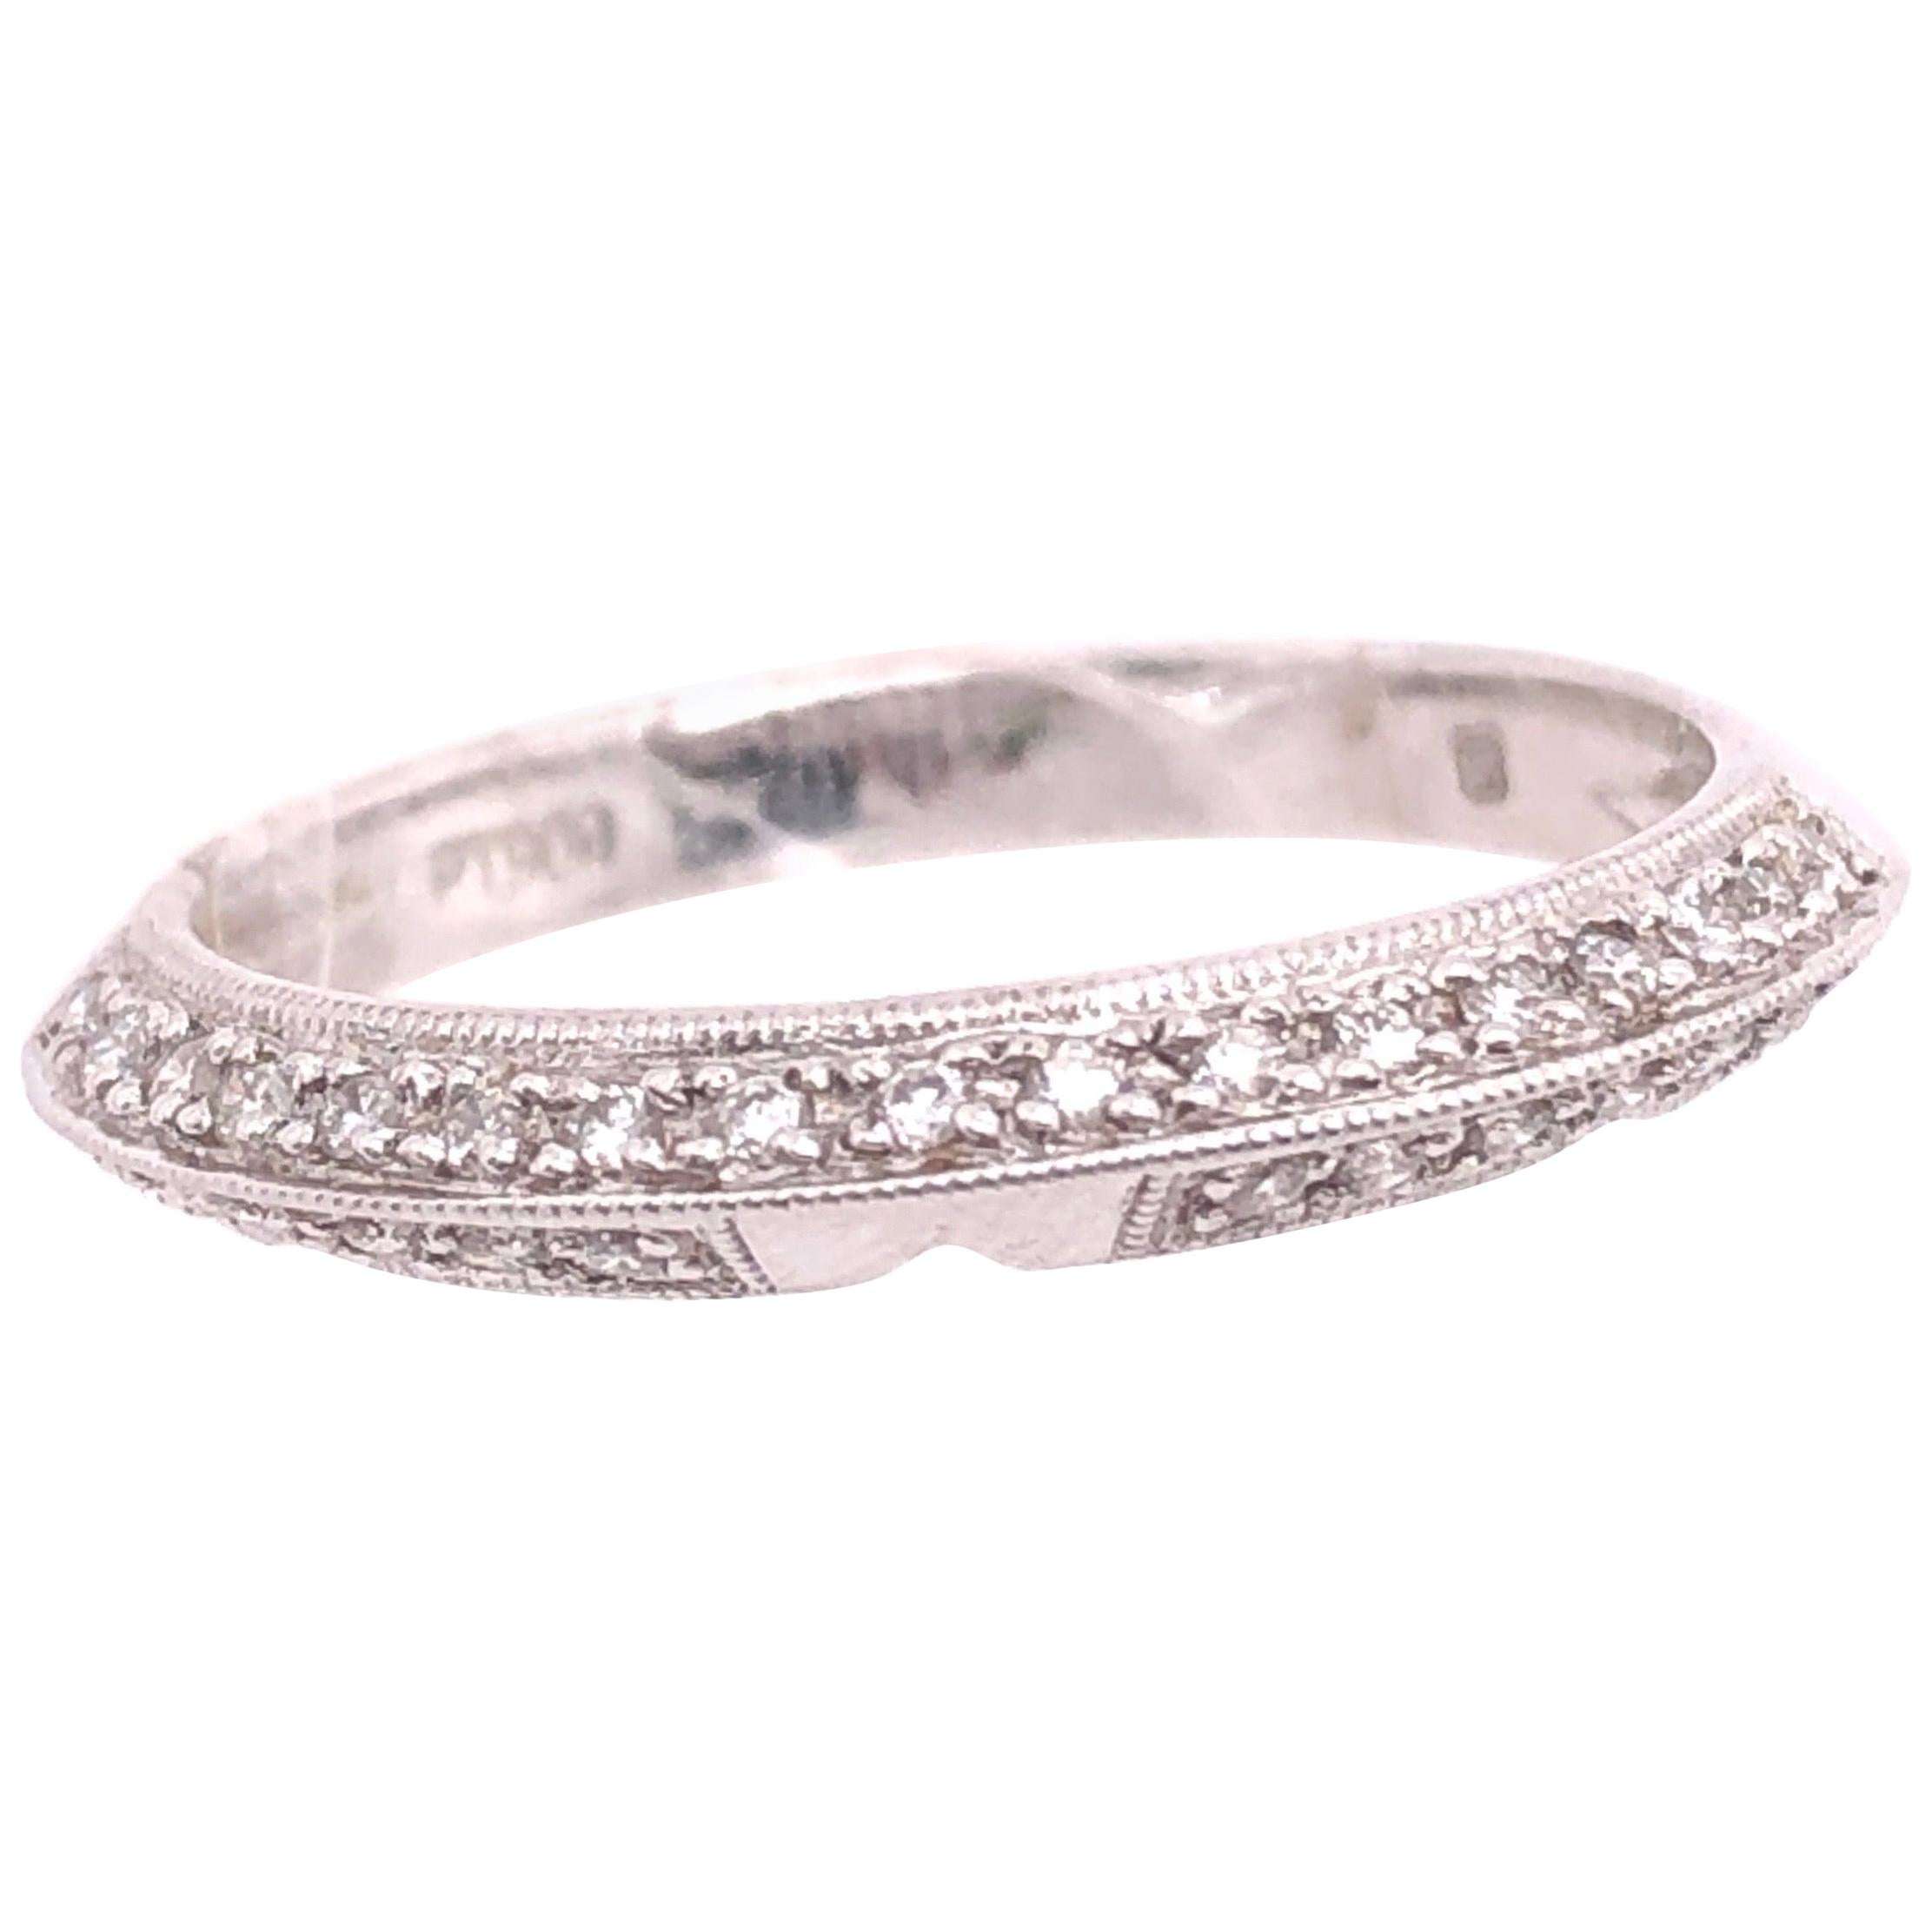 18 Karat White Gold and Diamond Band / Bridal Ring 0.13 Total Diamond Weight For Sale